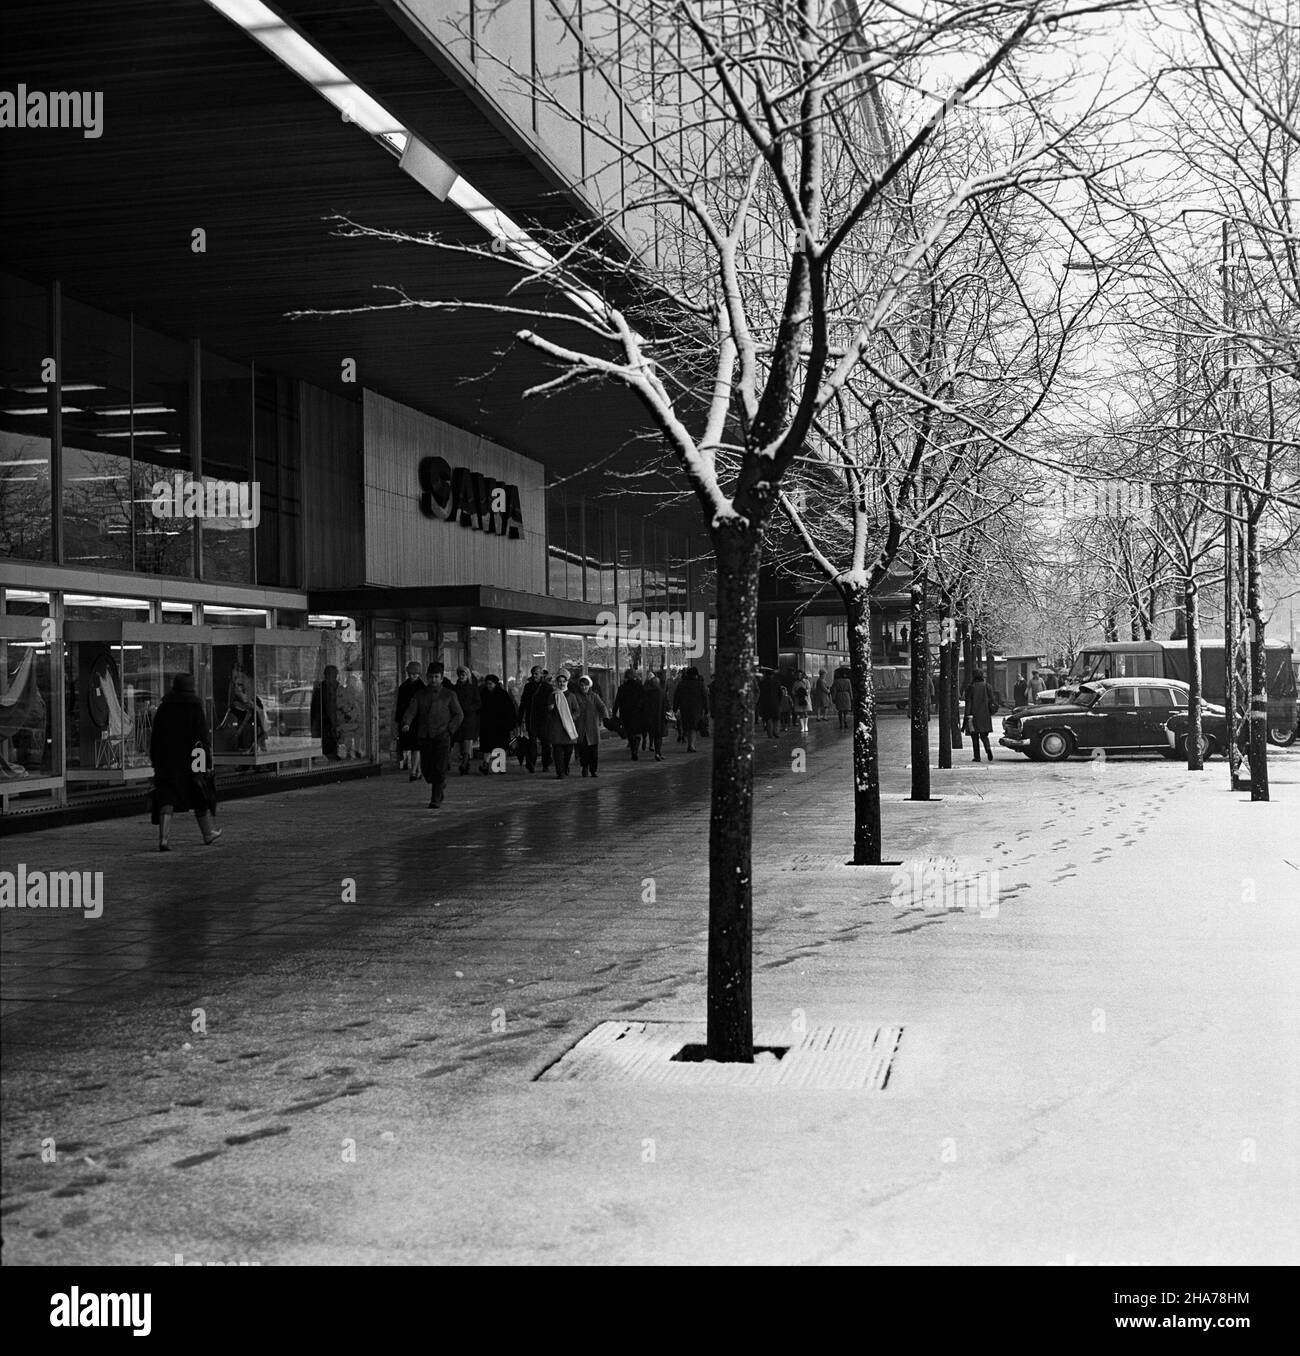 Centrum department store Black and White Stock Photos & Images - Alamy